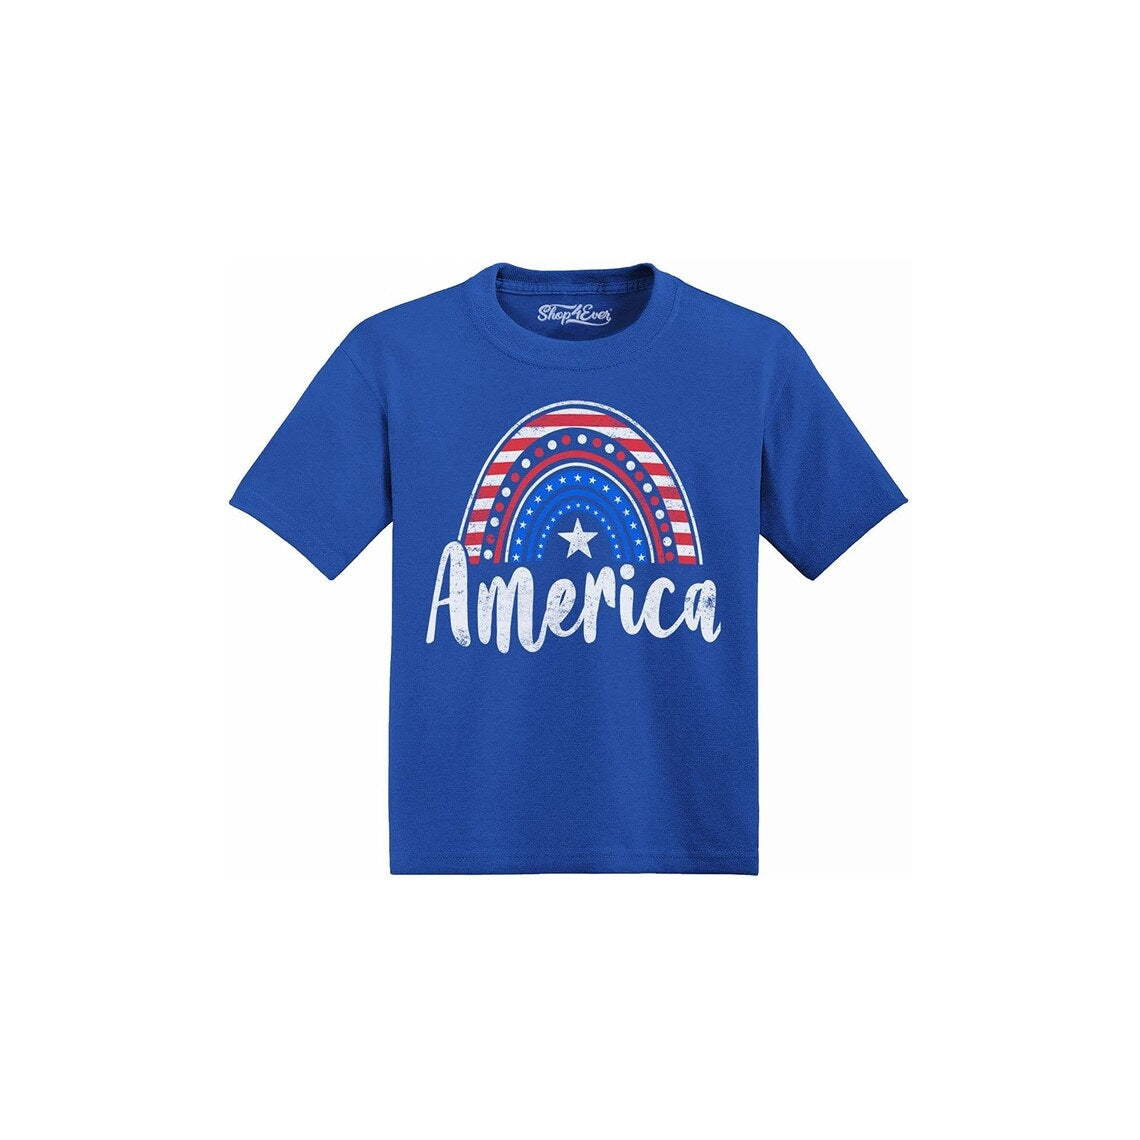 American Patriotic Rainbow 4th of July Toddler Cotton T-Shirt